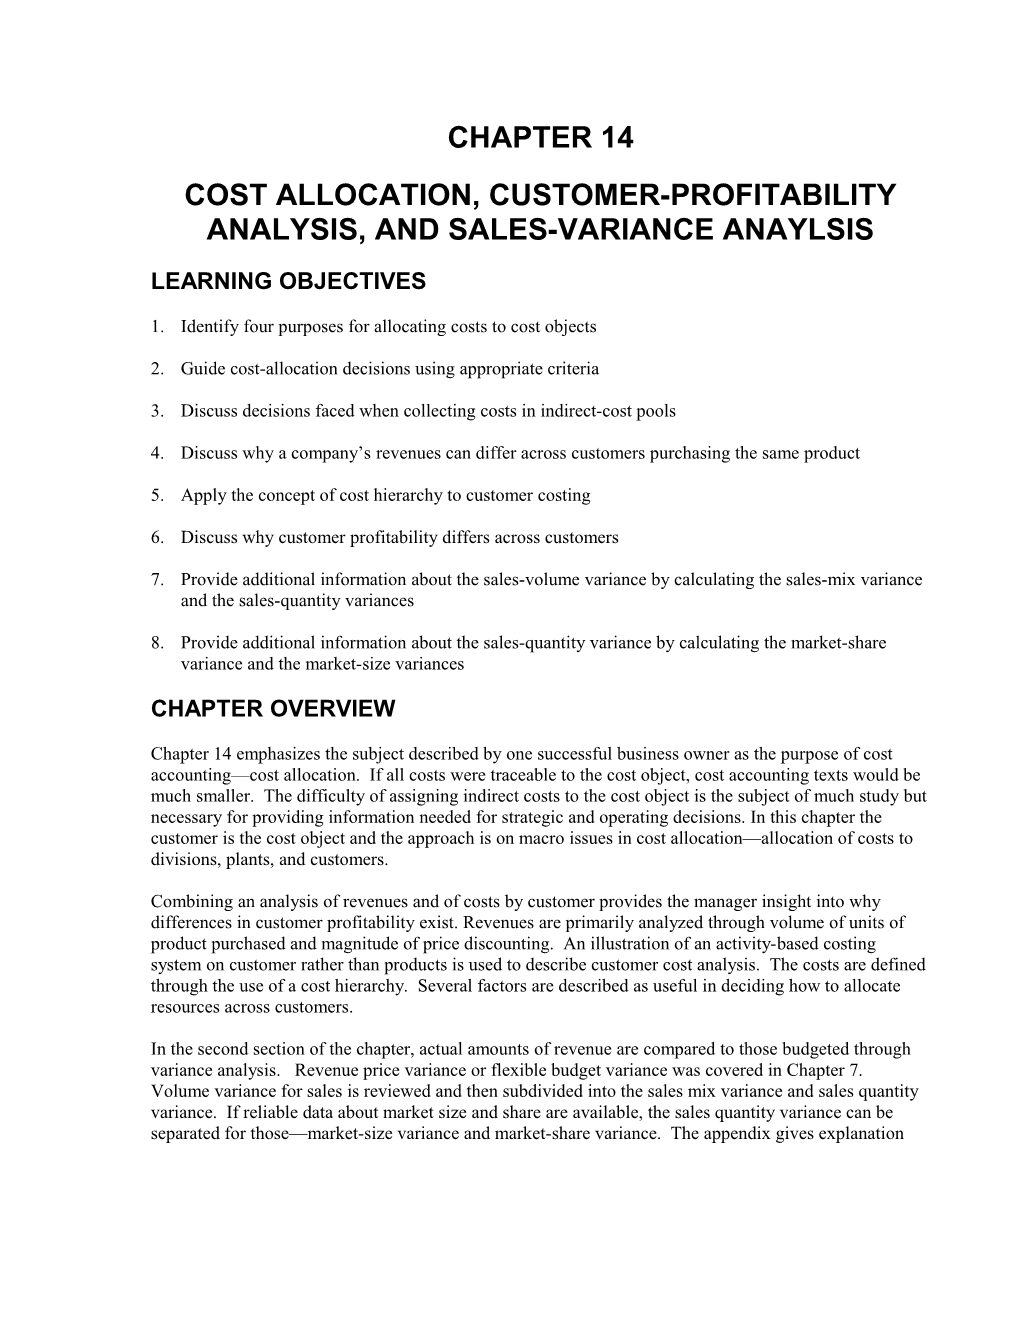 Cost Allocation, Customer-Profitability Analysis, and Sales-Variance Anaylsis